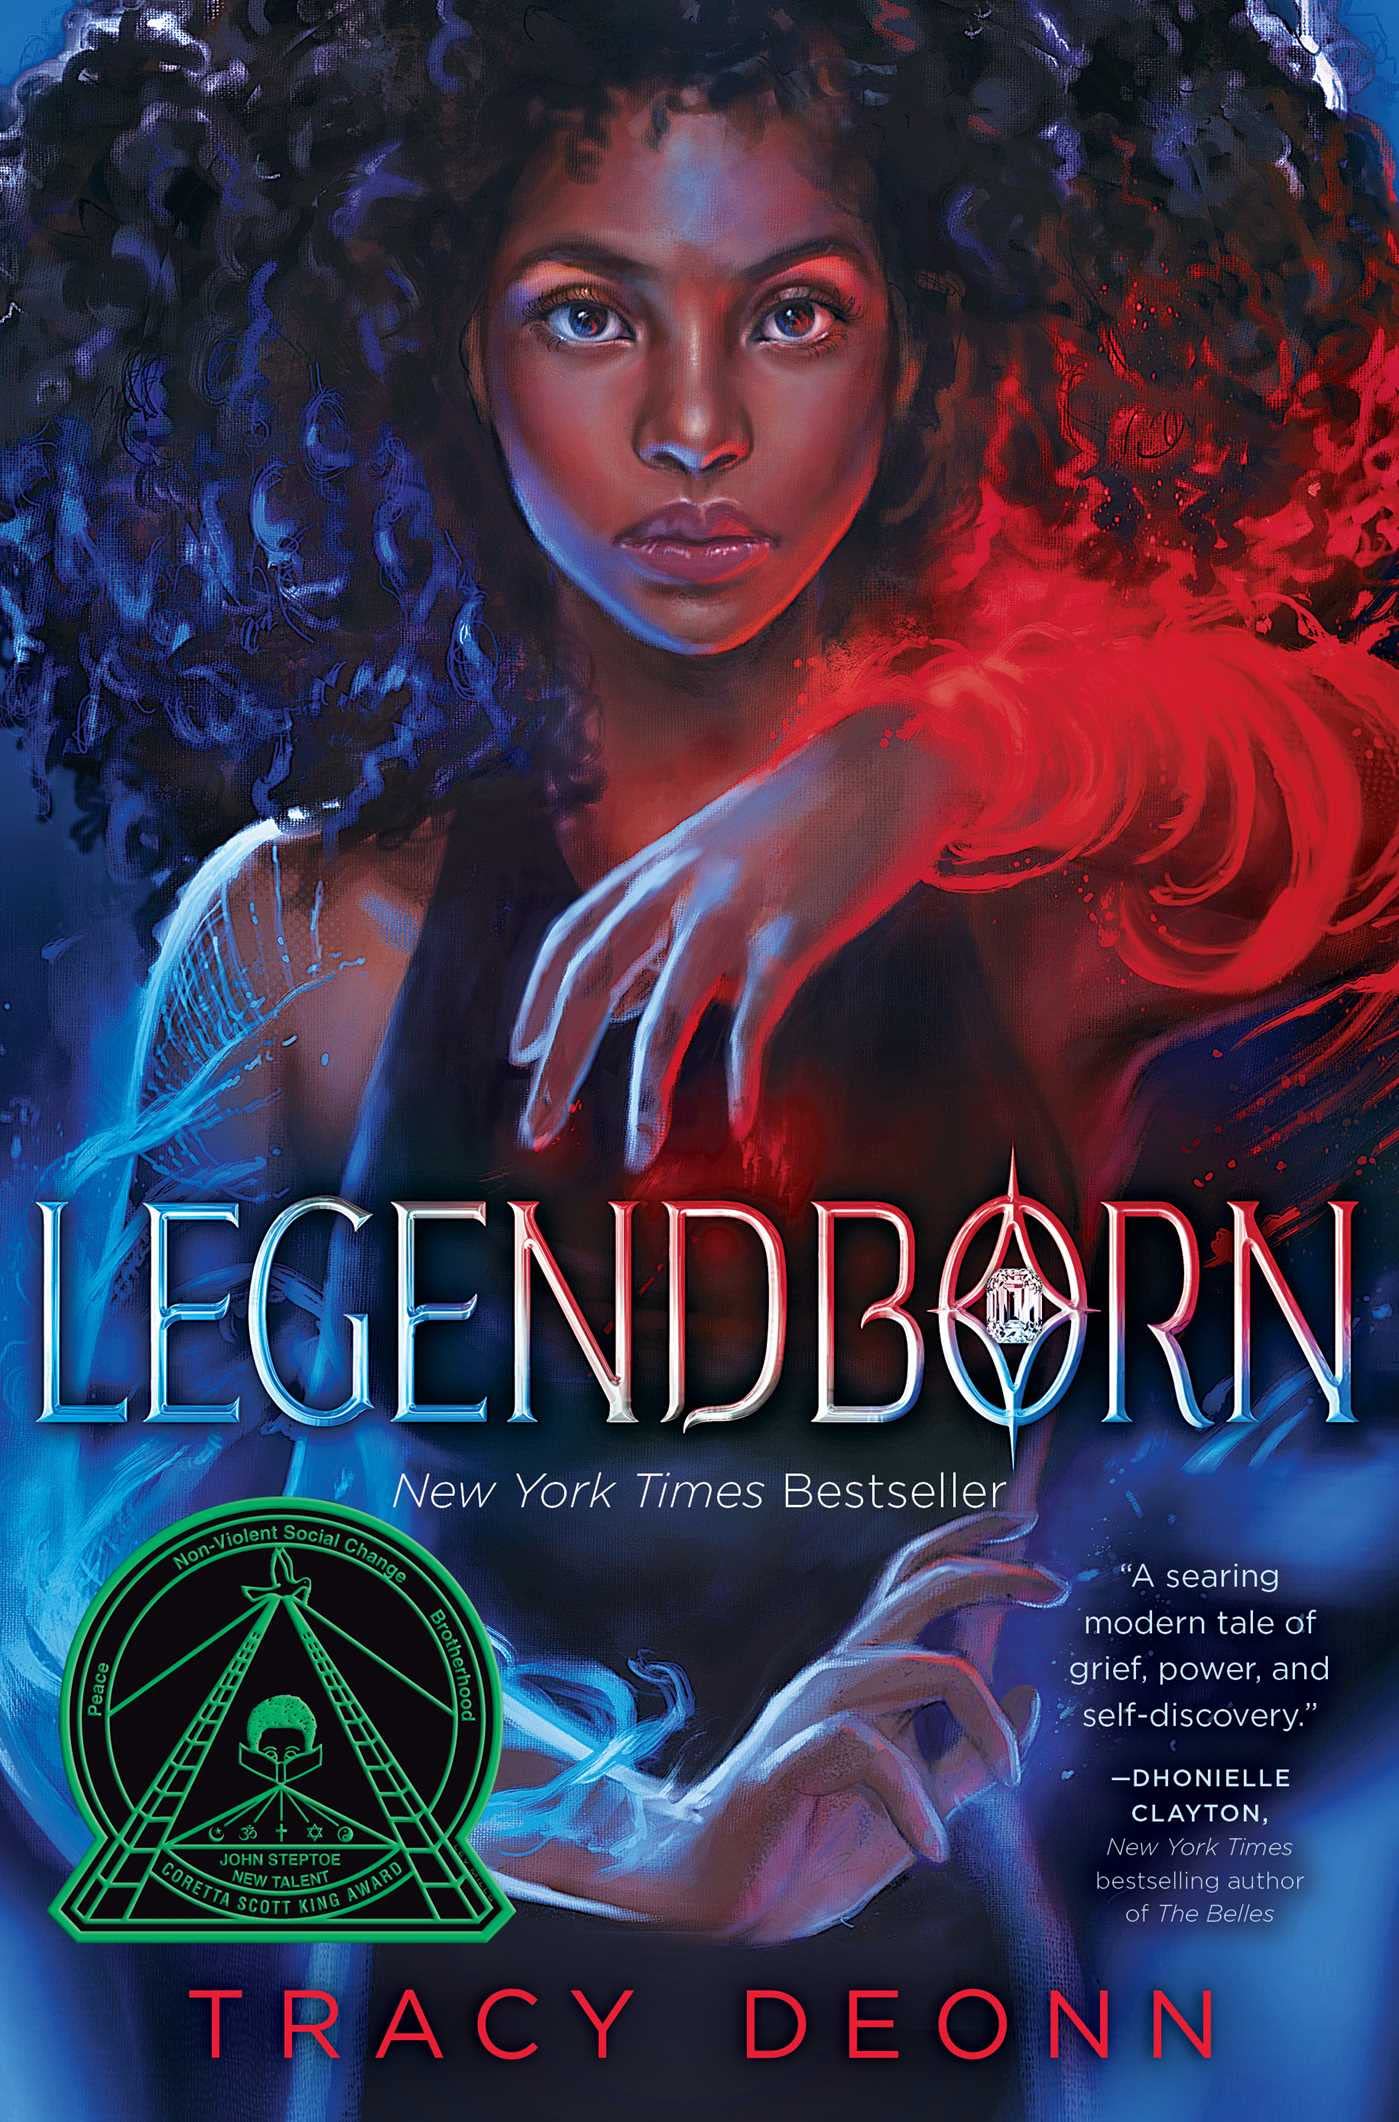 Illustration of a dark skinned girl with black, curly shoulder-length hair. Red light swirls around her left arm while blue light swirls around her right. The title "Legendborn" is superimposed across the middle of the image.